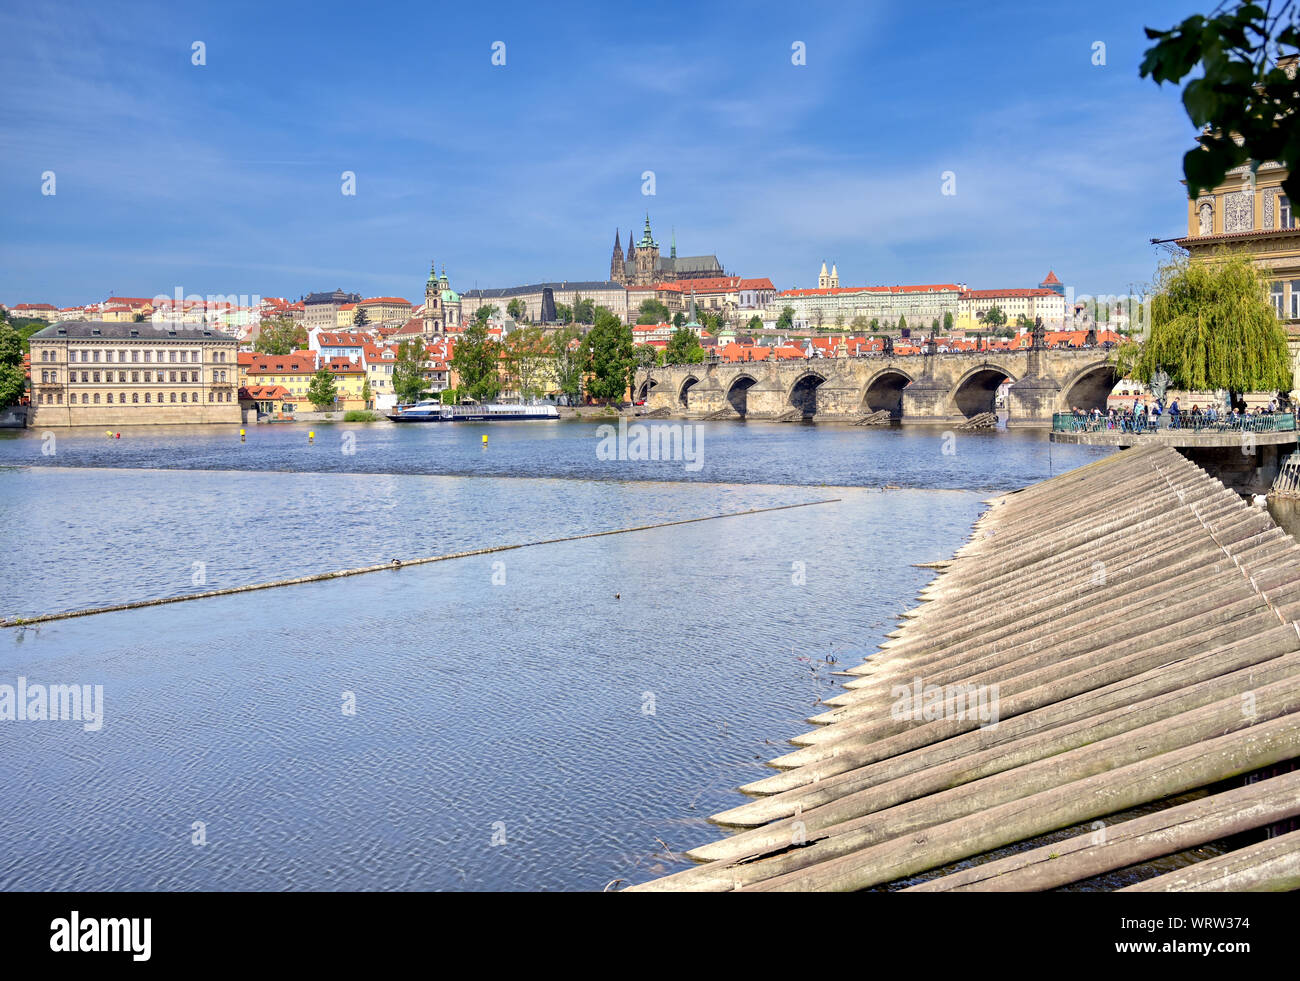 A view across the Charles Bridge and the Vltava River to Prague Castle and St. Vitas Cathedral in Prague, Czech Republic. Stock Photo